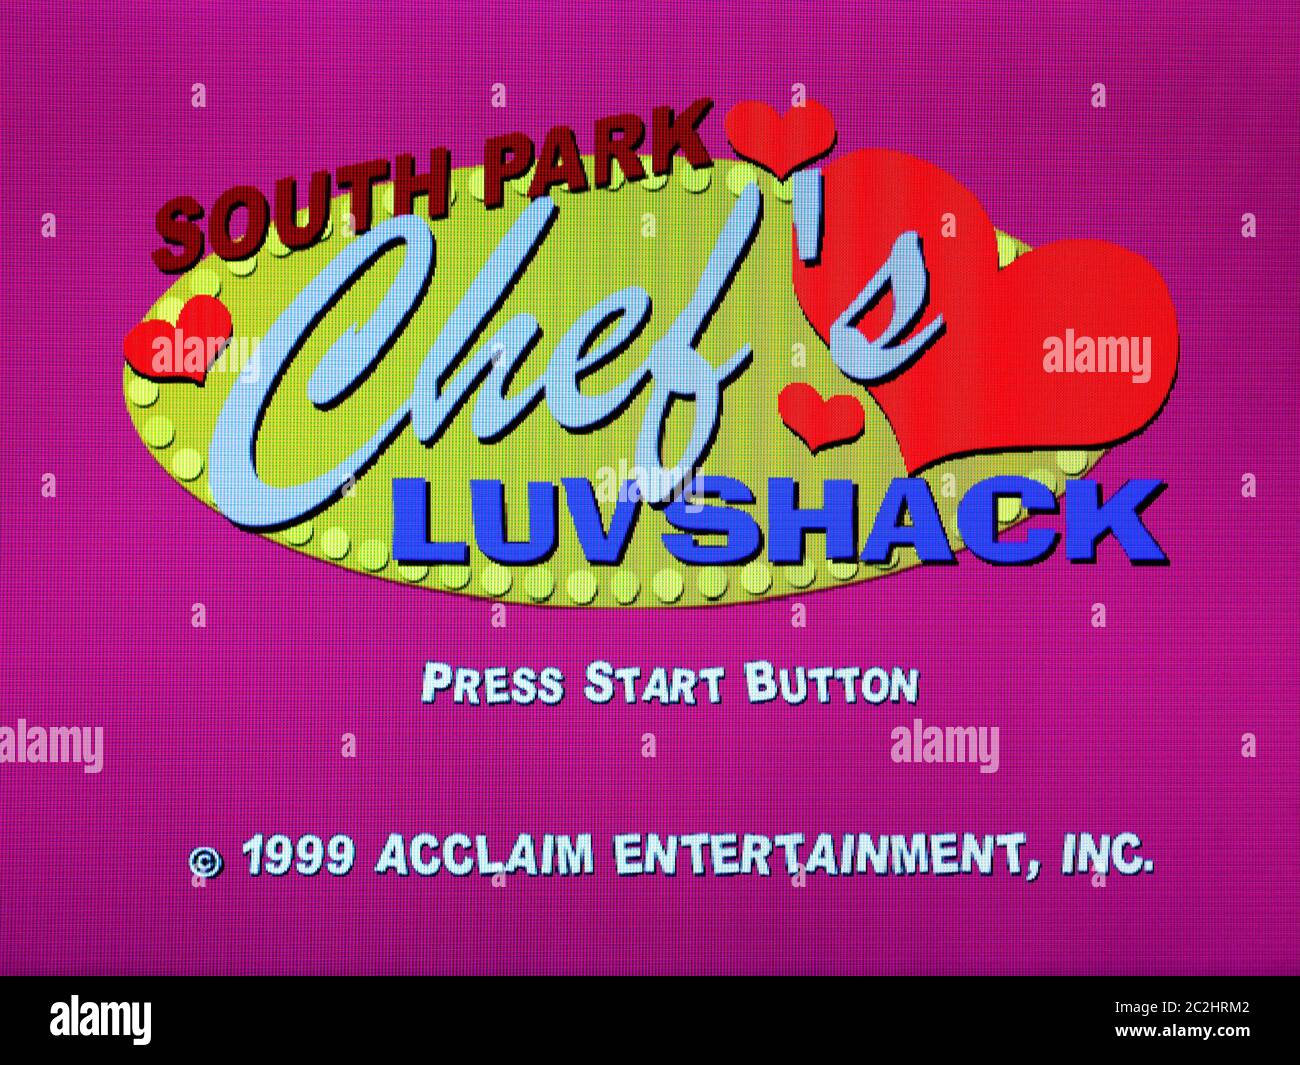 South Park Chef's Luvshack - Sega Dreamcast Videogame - Editorial use only Stock Photo